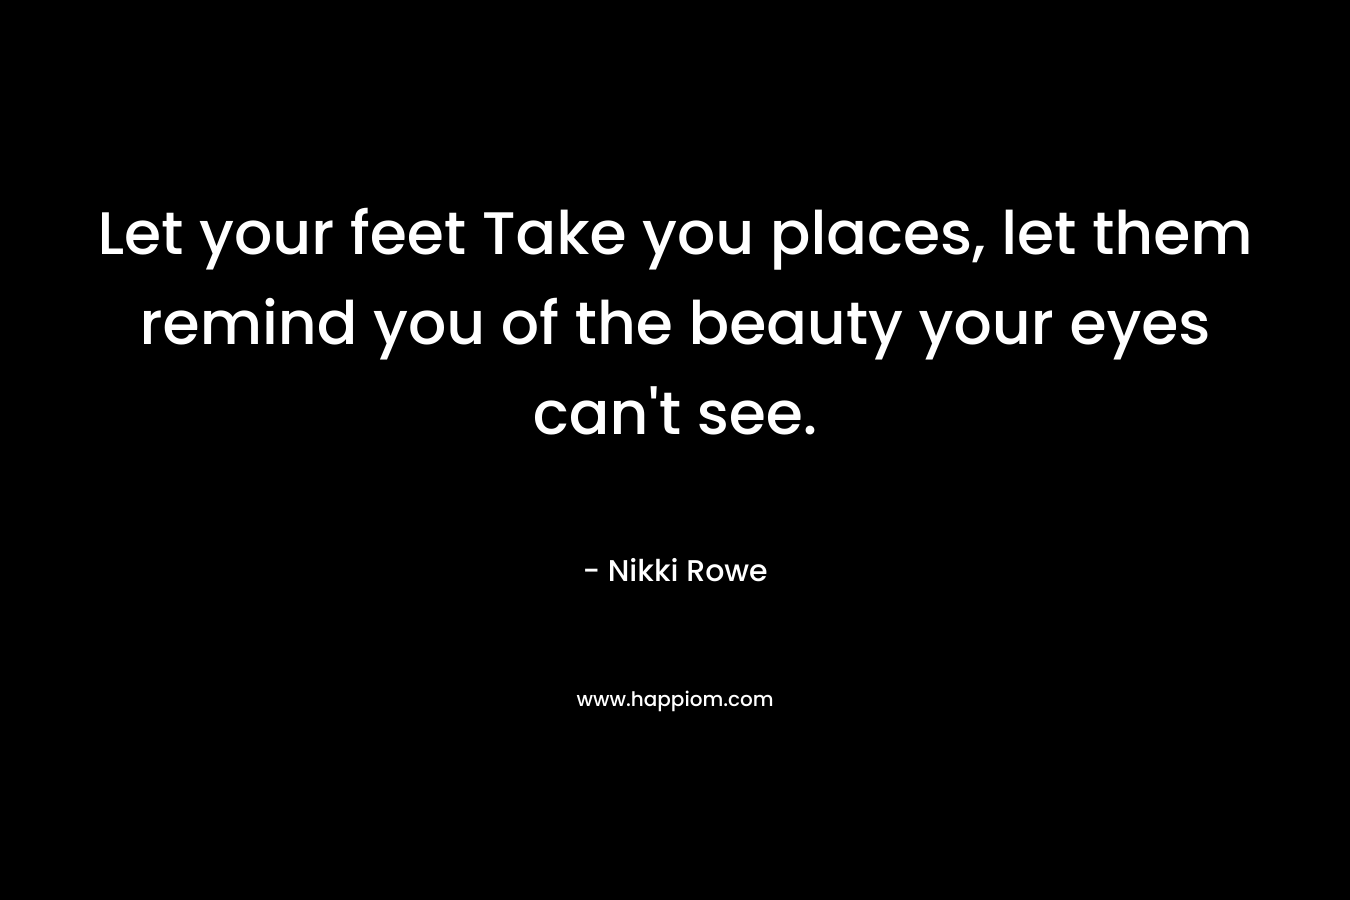 Let your feet Take you places, let them remind you of the beauty your eyes can’t see. – Nikki Rowe